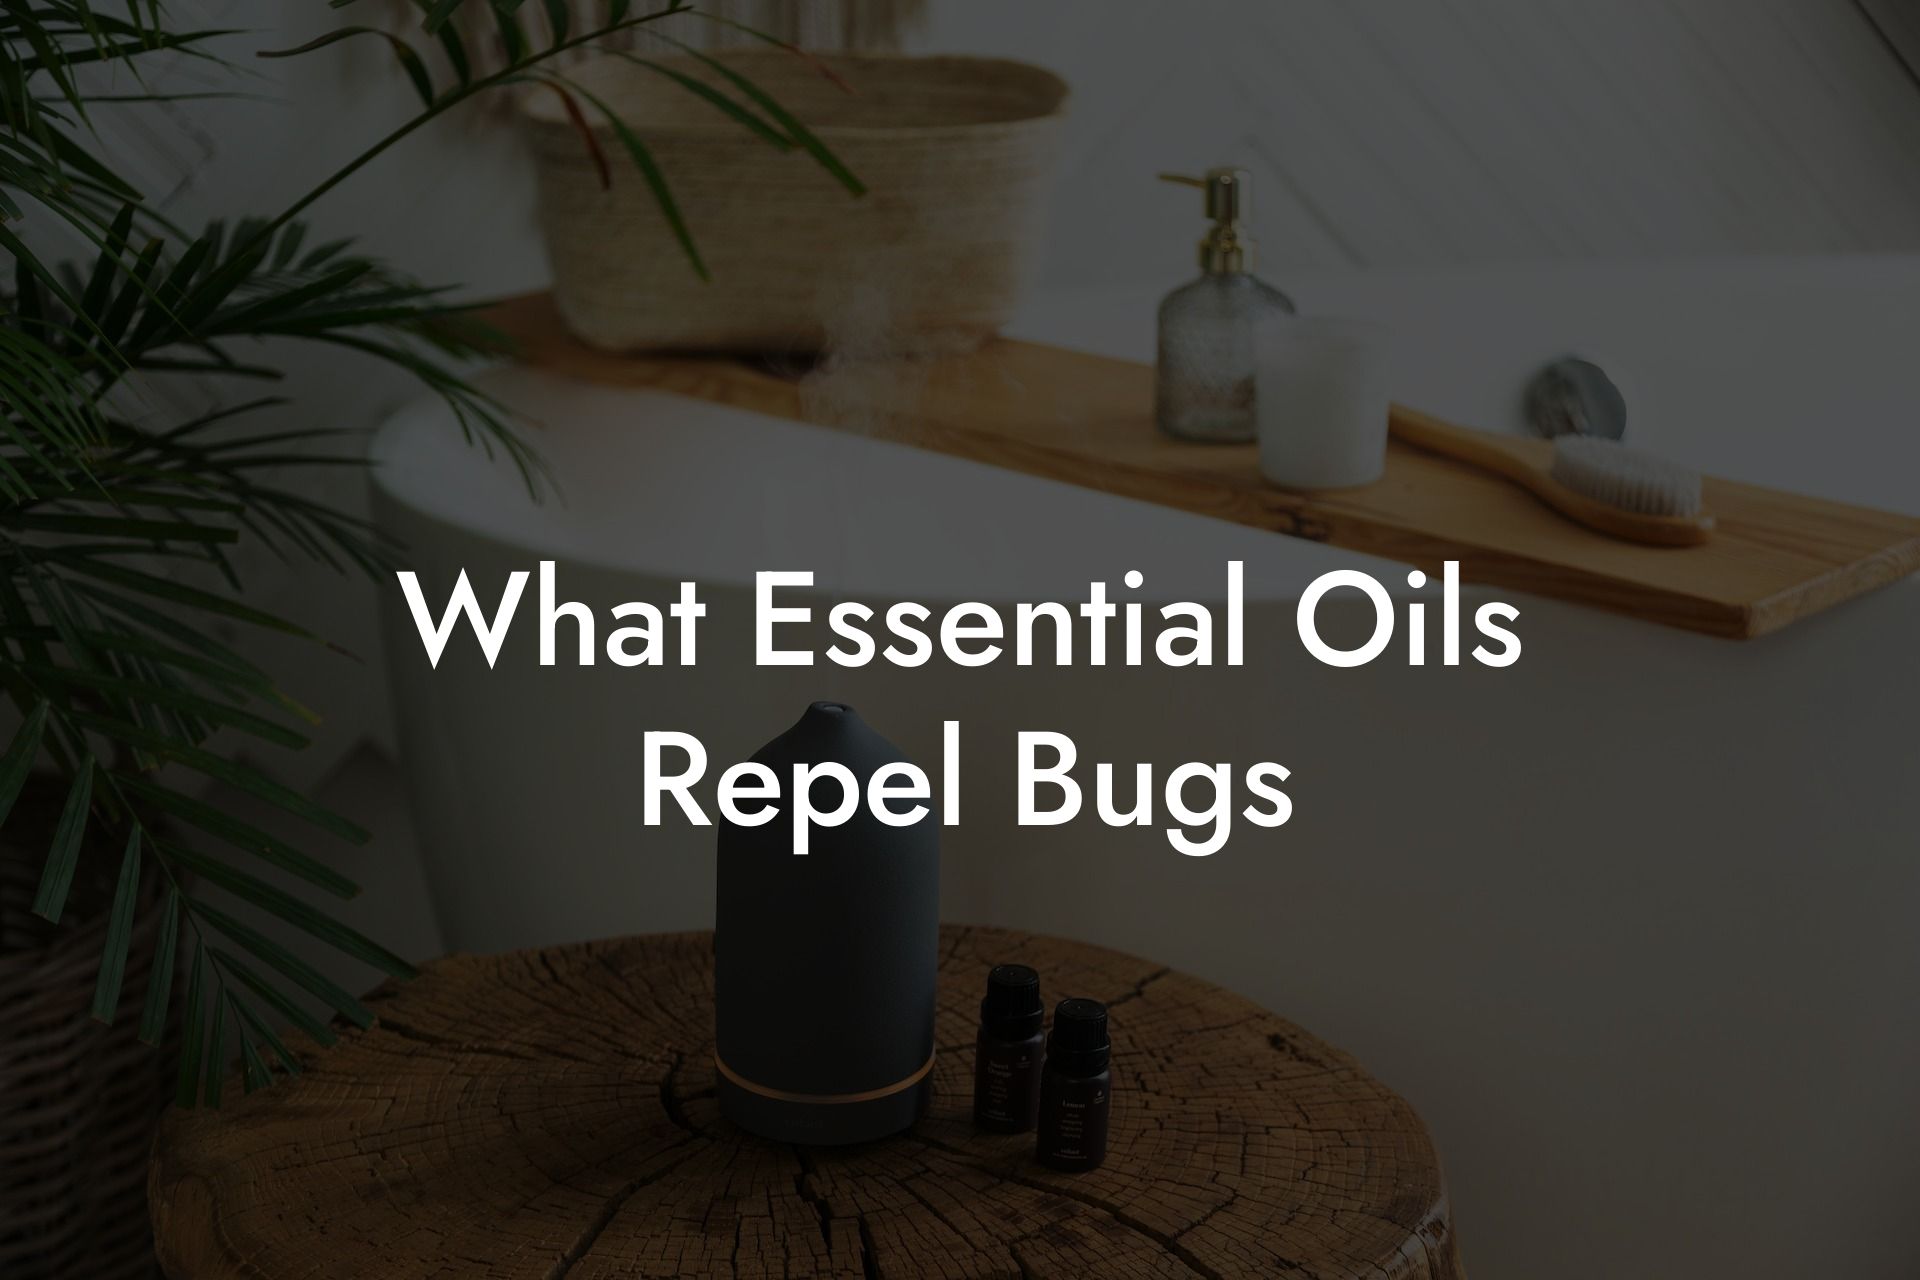 What Essential Oils Repel Bugs